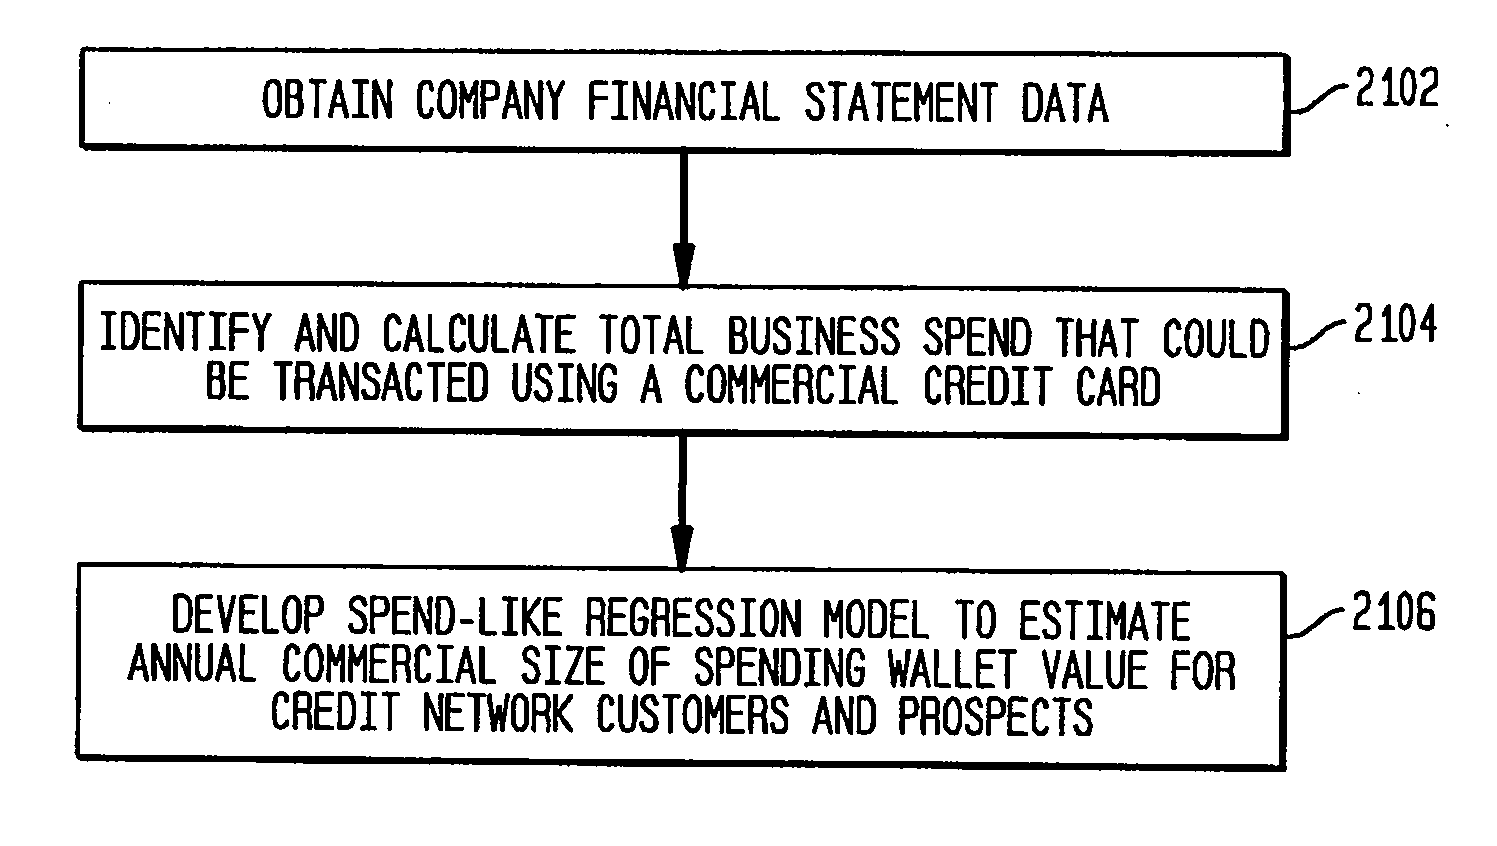 Using commercial share of wallet to rate investments